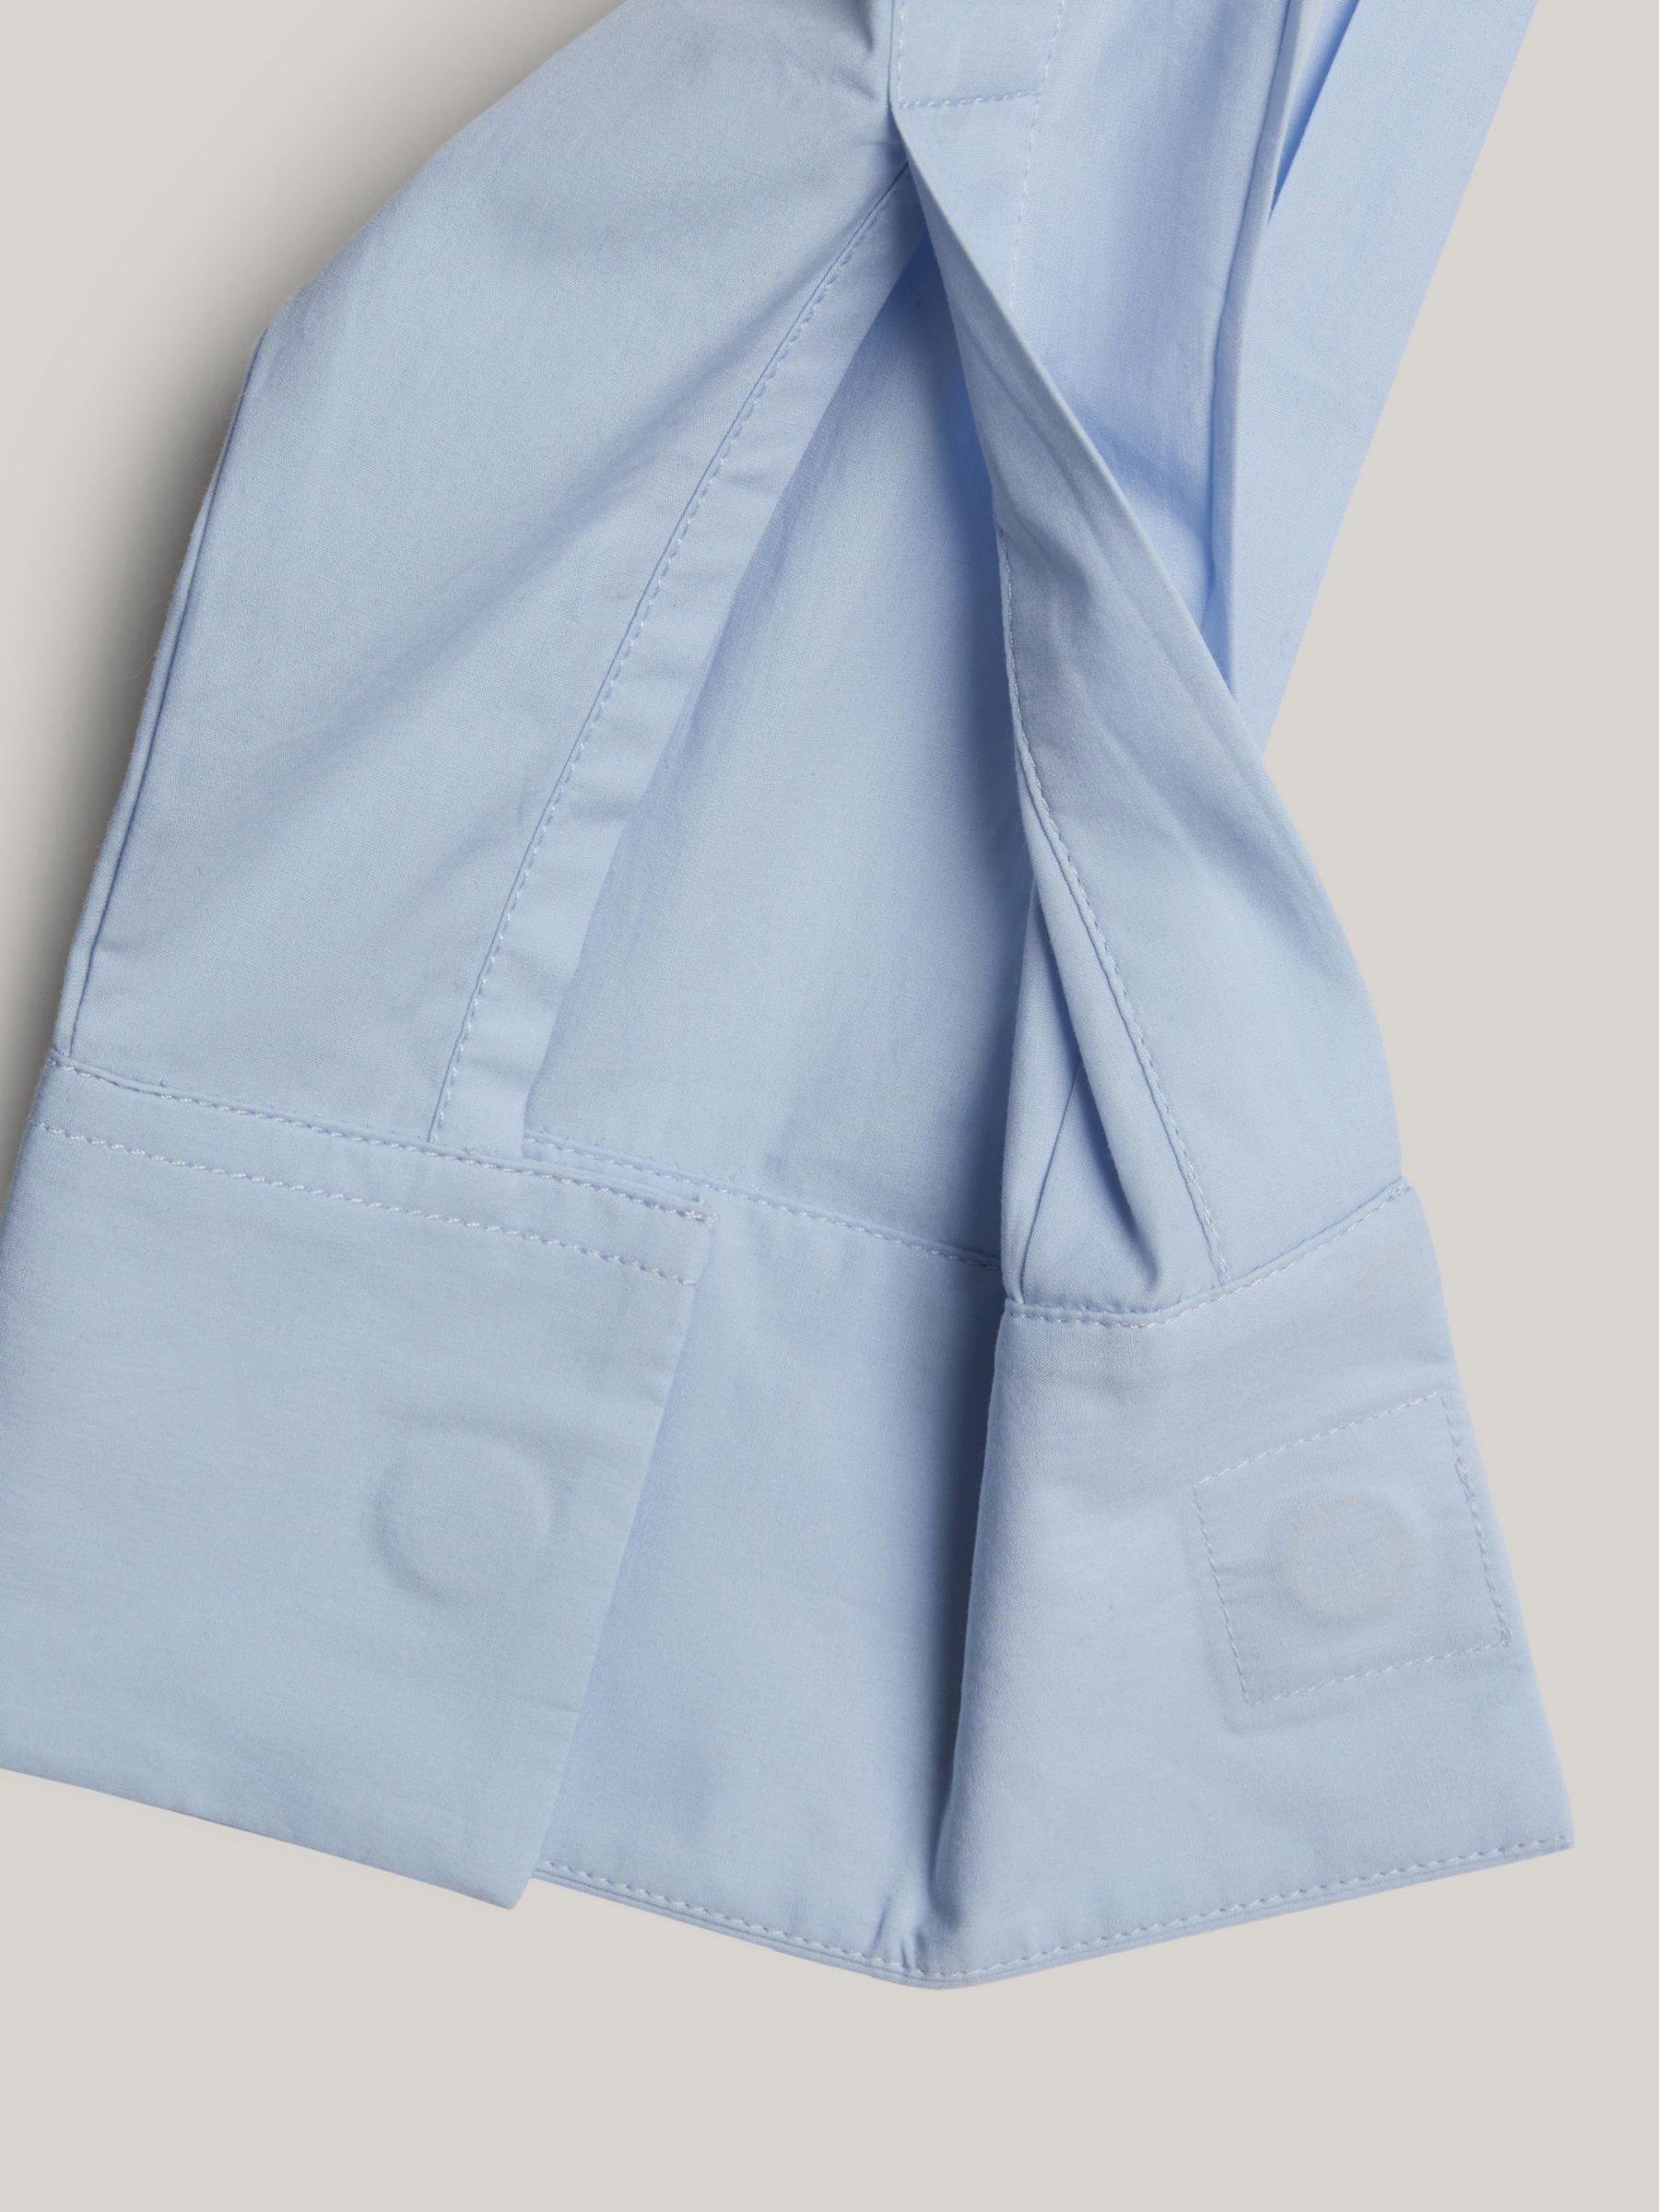 Buy Tommy Hilfiger Tommy Adaptive Easy Fit Shirt, Breezy Blue Online at johnlewis.com